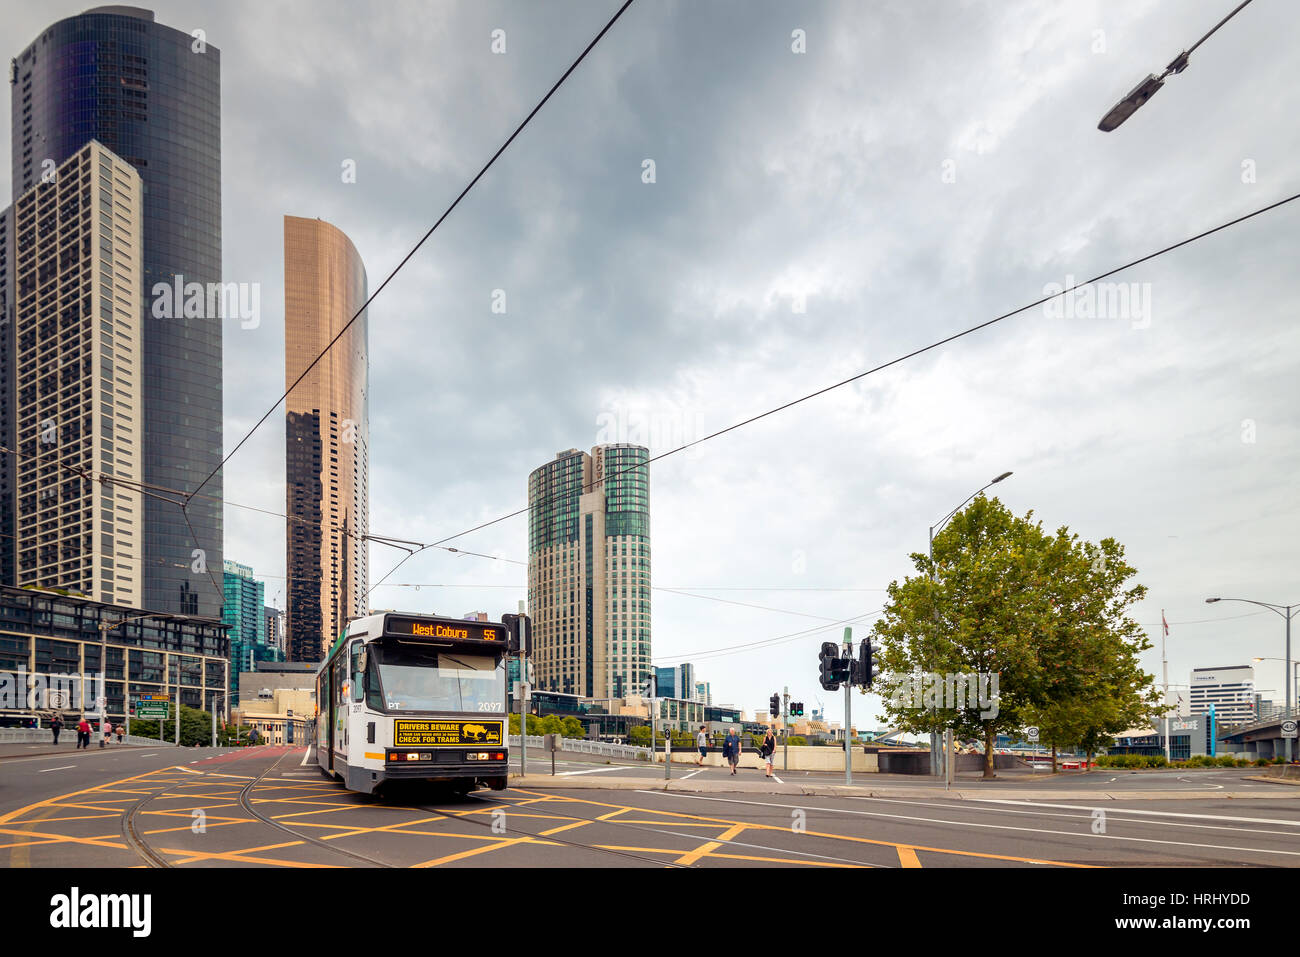 Melbourne, Australia - December 27, 2016: Melbourne City Tram, route 55 in CBD area. Tram service is the most common mode of  transport in the state. Stock Photo